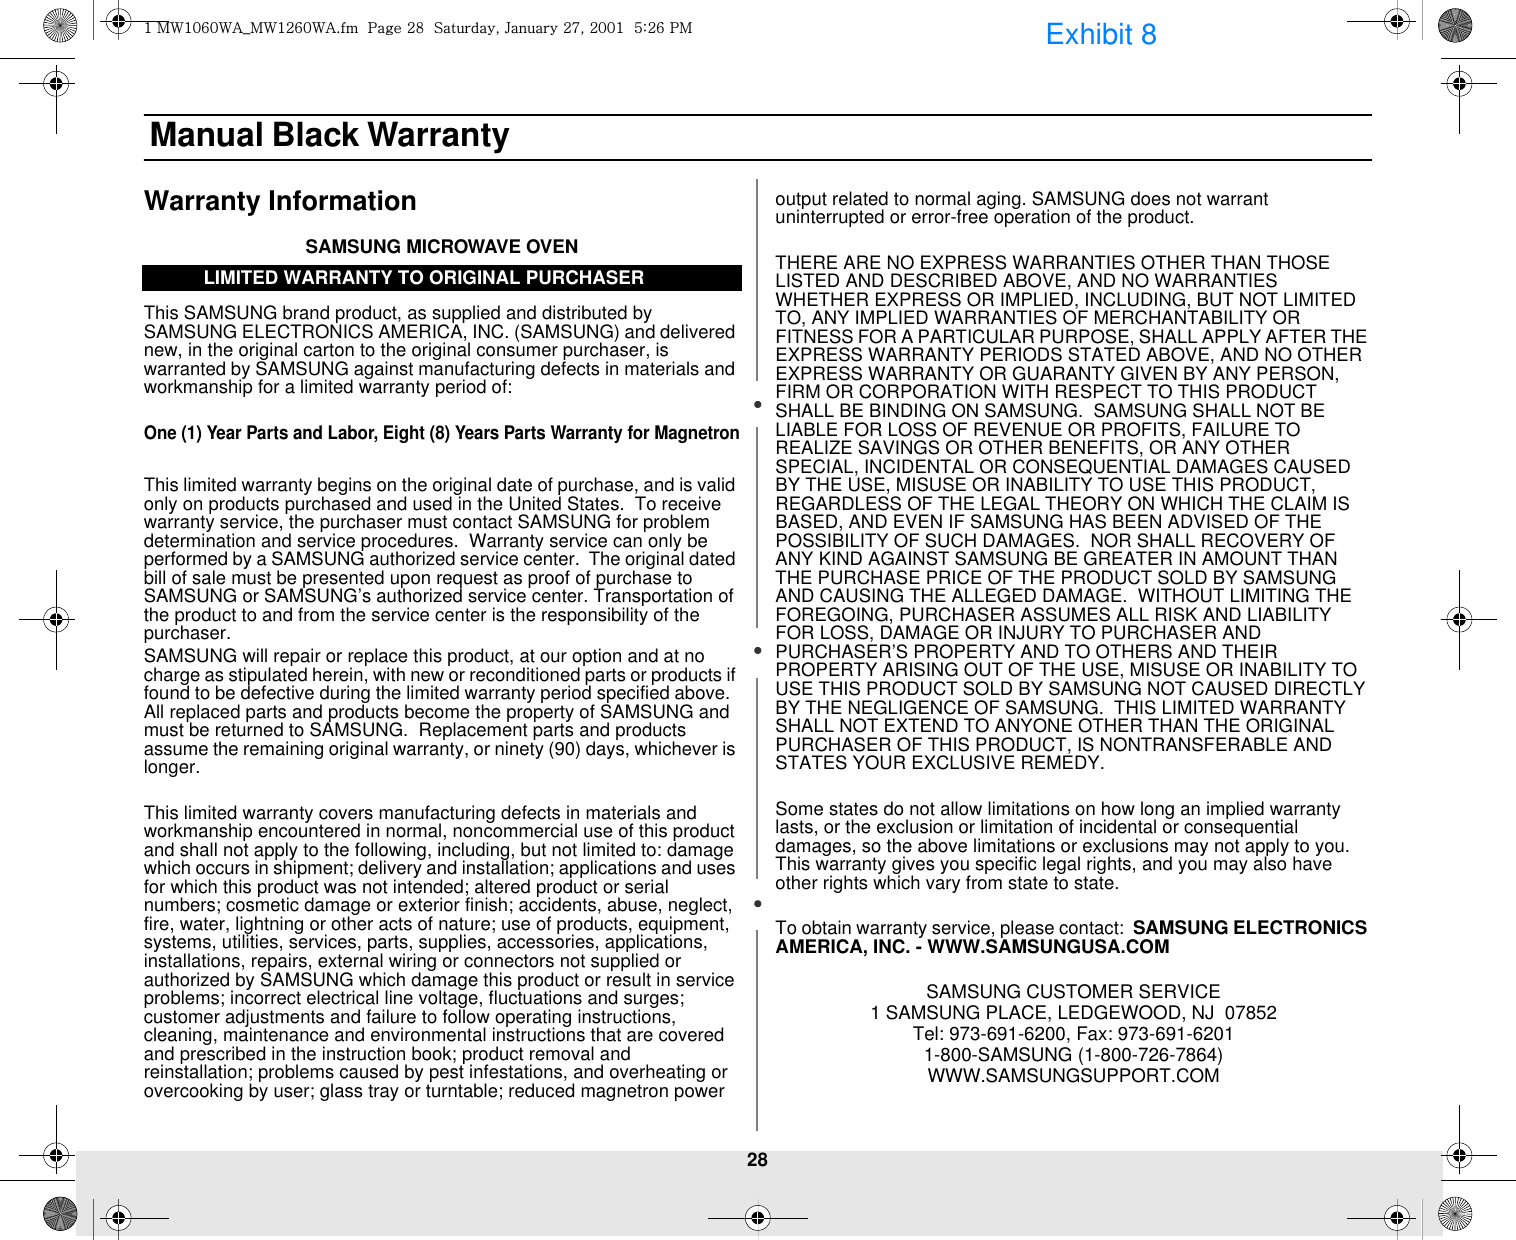 28 Manual Black WarrantyWarranty InformationSAMSUNG MICROWAVE OVENThis SAMSUNG brand product, as supplied and distributed by SAMSUNG ELECTRONICS AMERICA, INC. (SAMSUNG) and delivered new, in the original carton to the original consumer purchaser, is warranted by SAMSUNG against manufacturing defects in materials and workmanship for a limited warranty period of:One (1) Year Parts and Labor, Eight (8) Years Parts Warranty for MagnetronThis limited warranty begins on the original date of purchase, and is valid only on products purchased and used in the United States.  To receive warranty service, the purchaser must contact SAMSUNG for problem determination and service procedures.  Warranty service can only be performed by a SAMSUNG authorized service center.  The original dated bill of sale must be presented upon request as proof of purchase to SAMSUNG or SAMSUNG’s authorized service center. Transportation of the product to and from the service center is the responsibility of the purchaser.SAMSUNG will repair or replace this product, at our option and at no charge as stipulated herein, with new or reconditioned parts or products if found to be defective during the limited warranty period specified above.  All replaced parts and products become the property of SAMSUNG and must be returned to SAMSUNG.  Replacement parts and products assume the remaining original warranty, or ninety (90) days, whichever is longer.This limited warranty covers manufacturing defects in materials and workmanship encountered in normal, noncommercial use of this product and shall not apply to the following, including, but not limited to: damage which occurs in shipment; delivery and installation; applications and uses for which this product was not intended; altered product or serial numbers; cosmetic damage or exterior finish; accidents, abuse, neglect, fire, water, lightning or other acts of nature; use of products, equipment, systems, utilities, services, parts, supplies, accessories, applications, installations, repairs, external wiring or connectors not supplied or authorized by SAMSUNG which damage this product or result in service problems; incorrect electrical line voltage, fluctuations and surges; customer adjustments and failure to follow operating instructions, cleaning, maintenance and environmental instructions that are covered and prescribed in the instruction book; product removal and reinstallation; problems caused by pest infestations, and overheating or overcooking by user; glass tray or turntable; reduced magnetron power output related to normal aging. SAMSUNG does not warrant uninterrupted or error-free operation of the product.THERE ARE NO EXPRESS WARRANTIES OTHER THAN THOSE LISTED AND DESCRIBED ABOVE, AND NO WARRANTIES WHETHER EXPRESS OR IMPLIED, INCLUDING, BUT NOT LIMITED TO, ANY IMPLIED WARRANTIES OF MERCHANTABILITY OR FITNESS FOR A PARTICULAR PURPOSE, SHALL APPLY AFTER THE EXPRESS WARRANTY PERIODS STATED ABOVE, AND NO OTHER EXPRESS WARRANTY OR GUARANTY GIVEN BY ANY PERSON, FIRM OR CORPORATION WITH RESPECT TO THIS PRODUCT SHALL BE BINDING ON SAMSUNG.  SAMSUNG SHALL NOT BE LIABLE FOR LOSS OF REVENUE OR PROFITS, FAILURE TO REALIZE SAVINGS OR OTHER BENEFITS, OR ANY OTHER SPECIAL, INCIDENTAL OR CONSEQUENTIAL DAMAGES CAUSED BY THE USE, MISUSE OR INABILITY TO USE THIS PRODUCT, REGARDLESS OF THE LEGAL THEORY ON WHICH THE CLAIM IS BASED, AND EVEN IF SAMSUNG HAS BEEN ADVISED OF THE POSSIBILITY OF SUCH DAMAGES.  NOR SHALL RECOVERY OF ANY KIND AGAINST SAMSUNG BE GREATER IN AMOUNT THAN THE PURCHASE PRICE OF THE PRODUCT SOLD BY SAMSUNG AND CAUSING THE ALLEGED DAMAGE.  WITHOUT LIMITING THE FOREGOING, PURCHASER ASSUMES ALL RISK AND LIABILITY FOR LOSS, DAMAGE OR INJURY TO PURCHASER AND PURCHASER’S PROPERTY AND TO OTHERS AND THEIR PROPERTY ARISING OUT OF THE USE, MISUSE OR INABILITY TO USE THIS PRODUCT SOLD BY SAMSUNG NOT CAUSED DIRECTLY BY THE NEGLIGENCE OF SAMSUNG.  THIS LIMITED WARRANTY SHALL NOT EXTEND TO ANYONE OTHER THAN THE ORIGINAL PURCHASER OF THIS PRODUCT, IS NONTRANSFERABLE AND STATES YOUR EXCLUSIVE REMEDY.Some states do not allow limitations on how long an implied warranty lasts, or the exclusion or limitation of incidental or consequential damages, so the above limitations or exclusions may not apply to you.  This warranty gives you specific legal rights, and you may also have other rights which vary from state to state.To obtain warranty service, please contact:  SAMSUNG ELECTRONICS AMERICA, INC. - WWW.SAMSUNGUSA.COMSAMSUNG CUSTOMER SERVICE 1 SAMSUNG PLACE, LEDGEWOOD, NJ  07852 Tel: 973-691-6200, Fax: 973-691-62011-800-SAMSUNG (1-800-726-7864)WWW.SAMSUNGSUPPORT.COMLIMITED WARRANTY TO ORIGINAL PURCHASERXGt~XW]W~ht~XY]W~hUGGwGY_GGzSGqGY^SGYWWXGG\aY]GwtExhibit 8